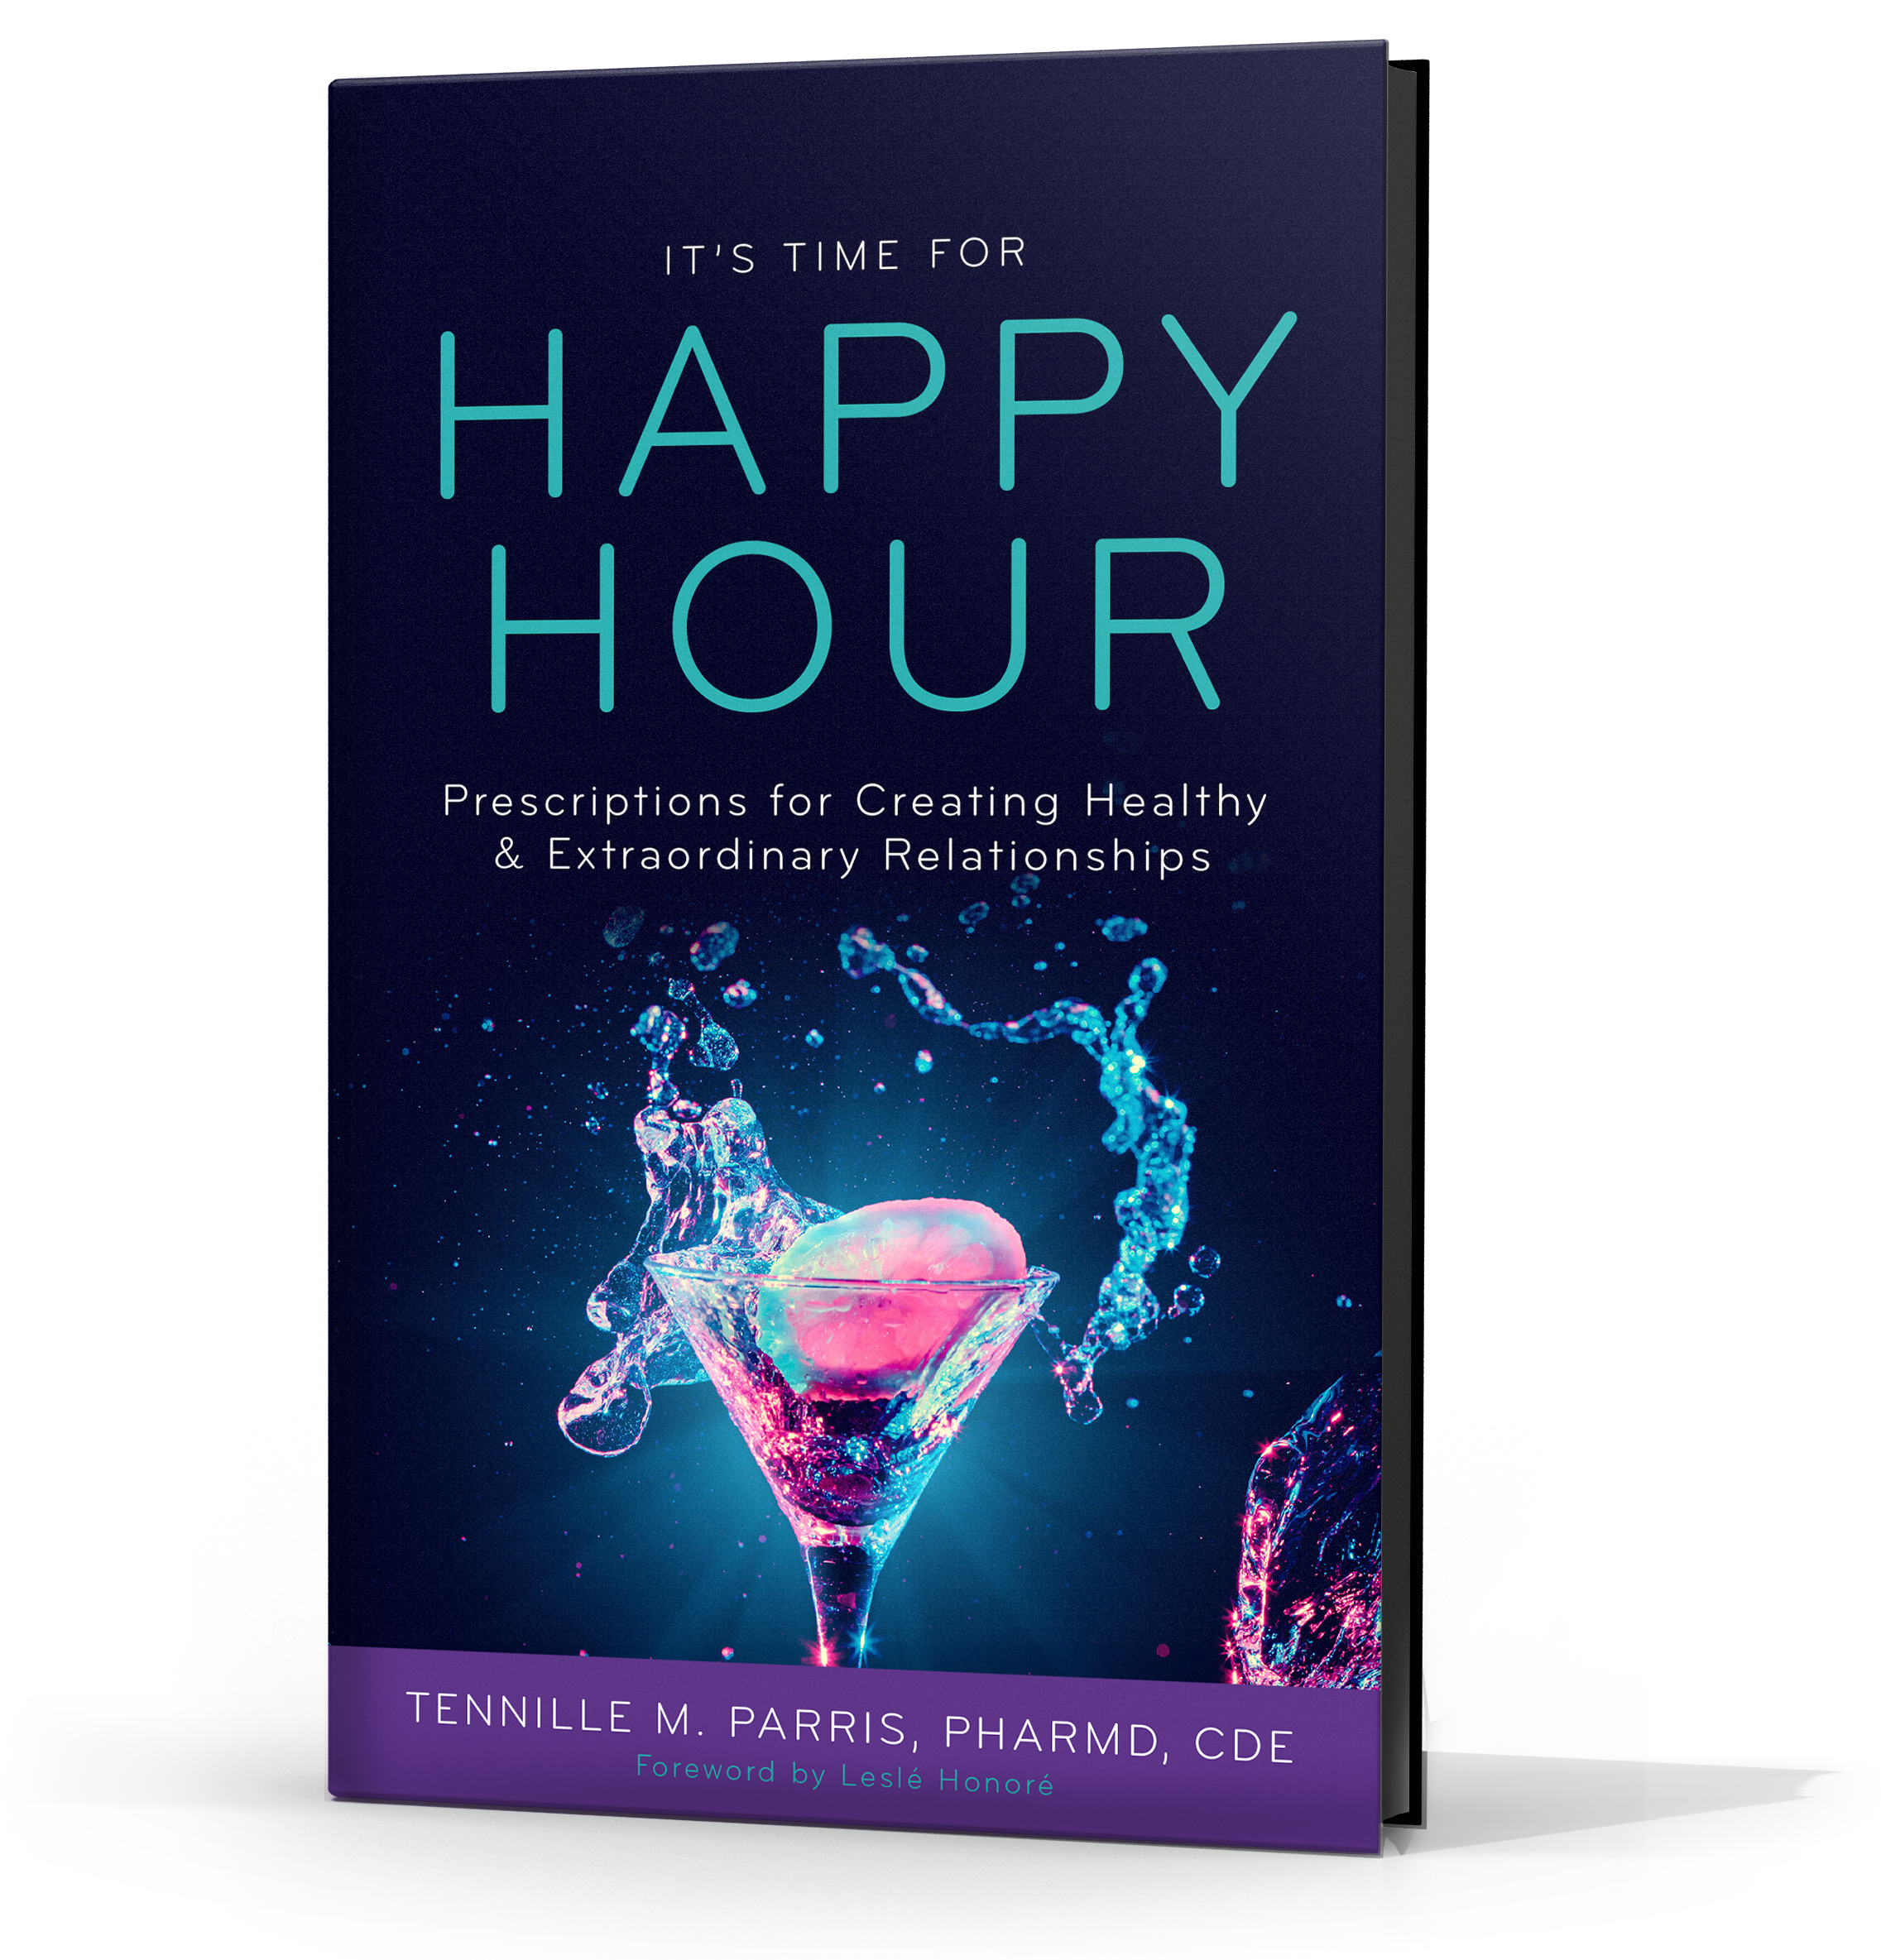 Medical Mixlogist and Bestselling Author Releases Book Lauding the Benefits of Happy Hour